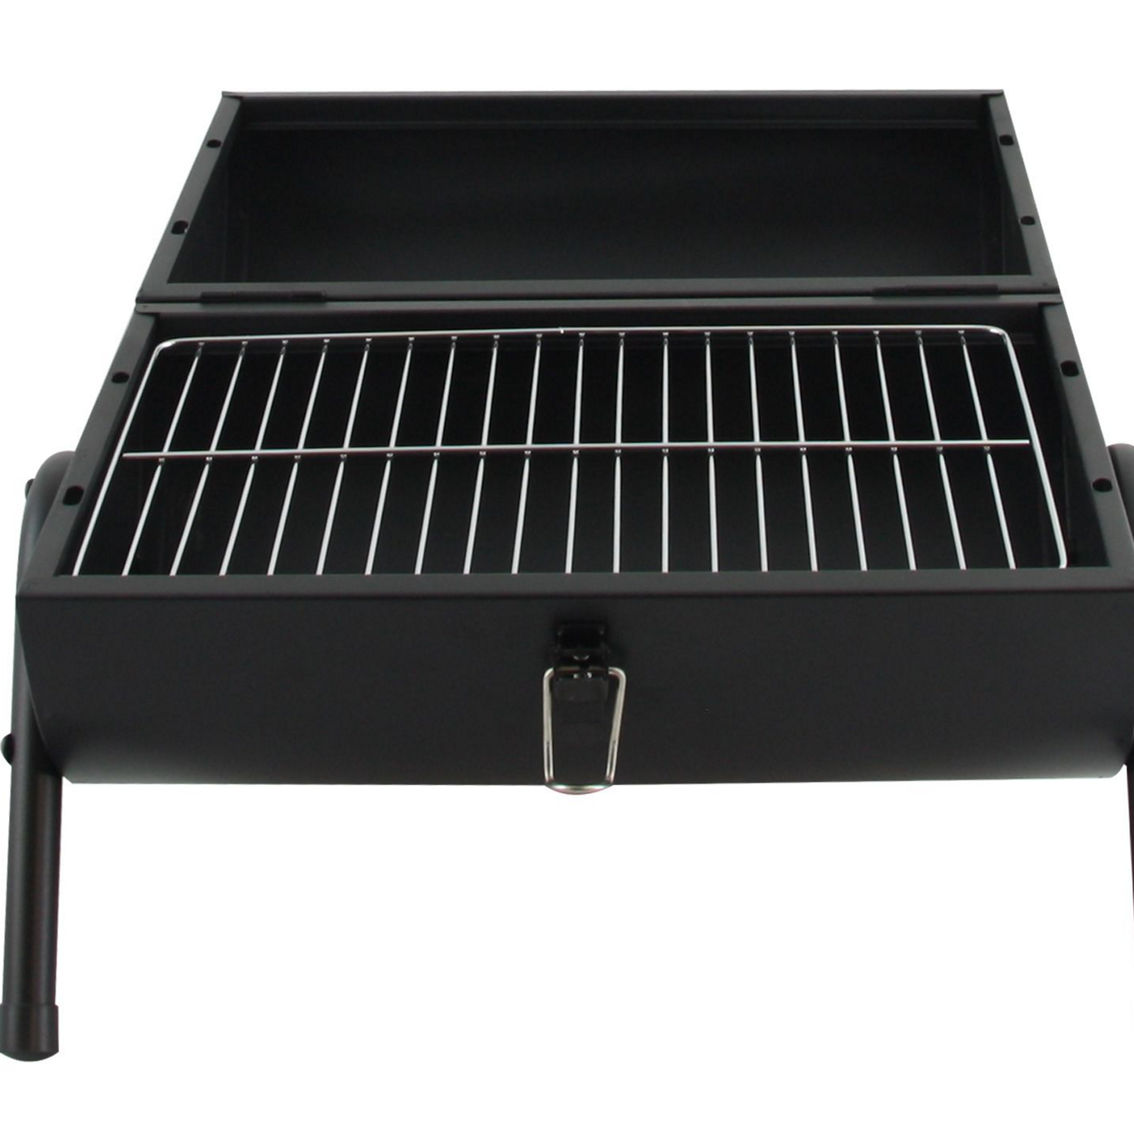 Gibson Home Delwin Carbon Steel Barrel BBQ in Black with Burgundy Wood Handle - Image 4 of 4